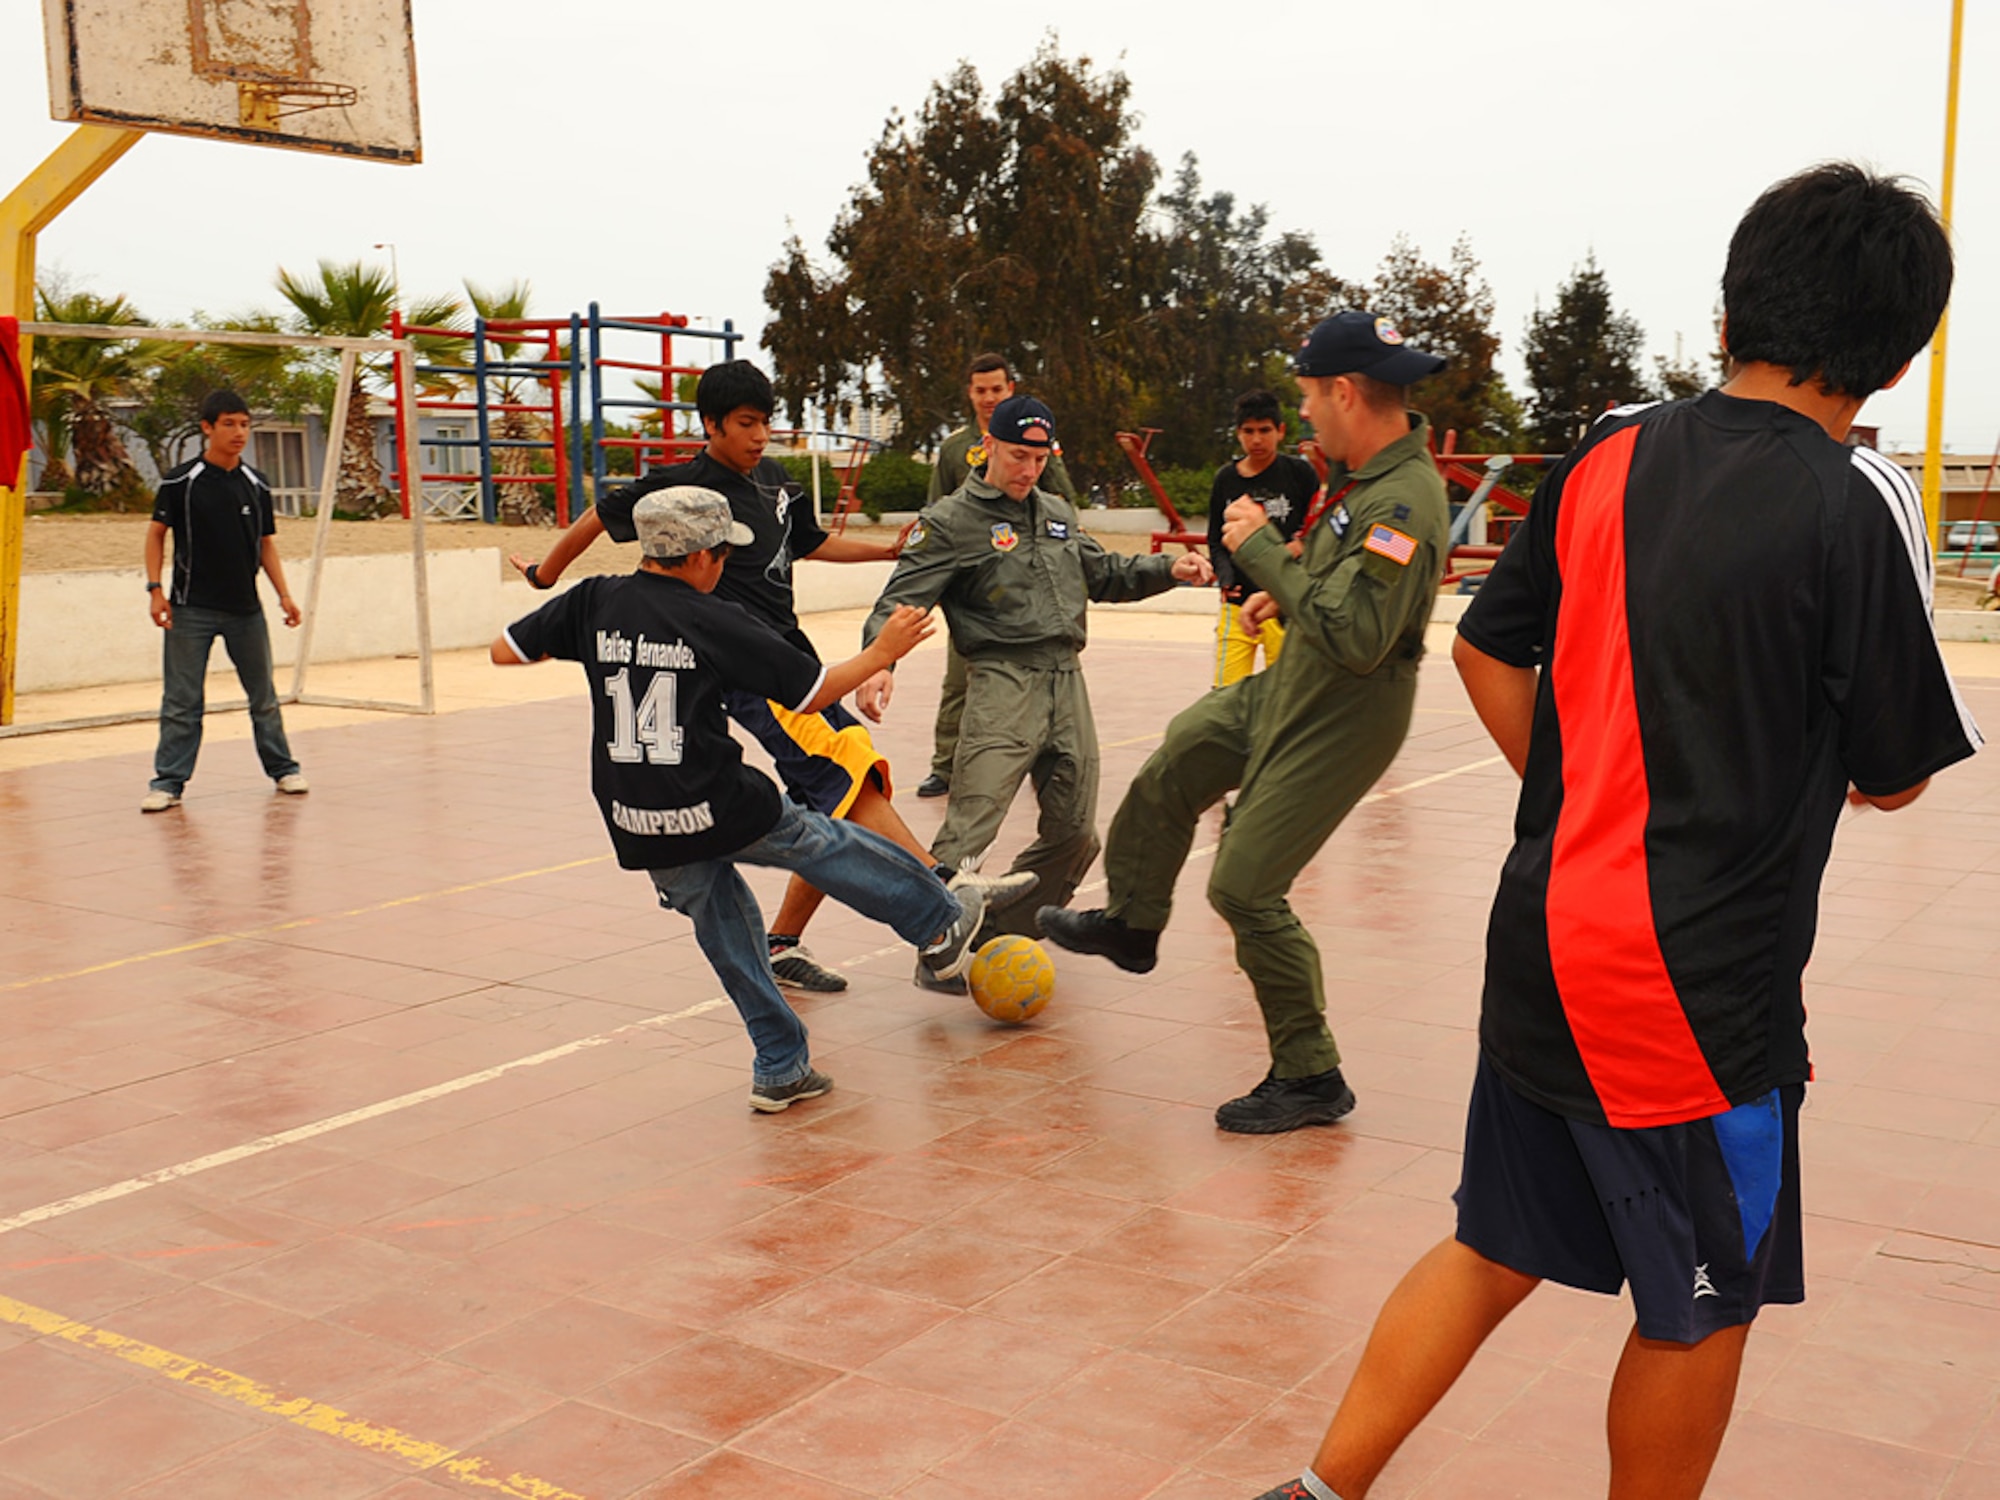 Members of the 71st Rescue Squadron play soccer with children at the Aldeas SOS orphanage in Antofagasta, Chile on Sunday.  The aircrew was part of a more than 40 person team of US, Chilean and Argentine Air Force members who visited the home for orphaned and abandoned children while taking time off from exercise SALITRE, a five-nation event focused on coalition interoperability during peacekeeping operations. (U.S. Air Force photo by Master Sgt. Daniel Farrell)